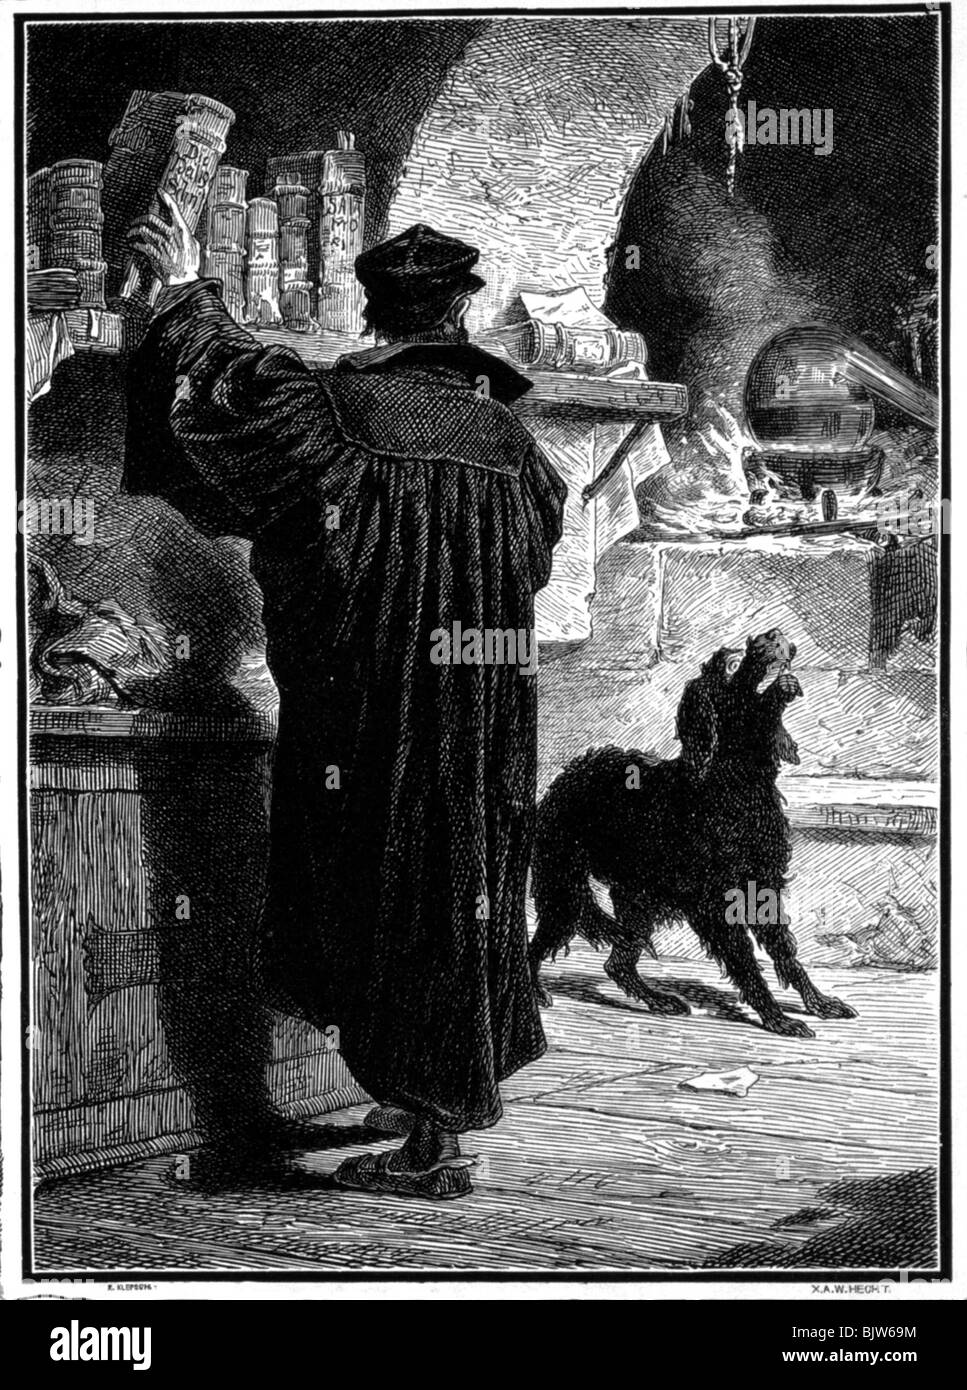 literature, 'Faust I', 3rd scene, 'Study', scene with Faust and poodle, woodcut by W. Hecht, circa 1870, Stock Photo